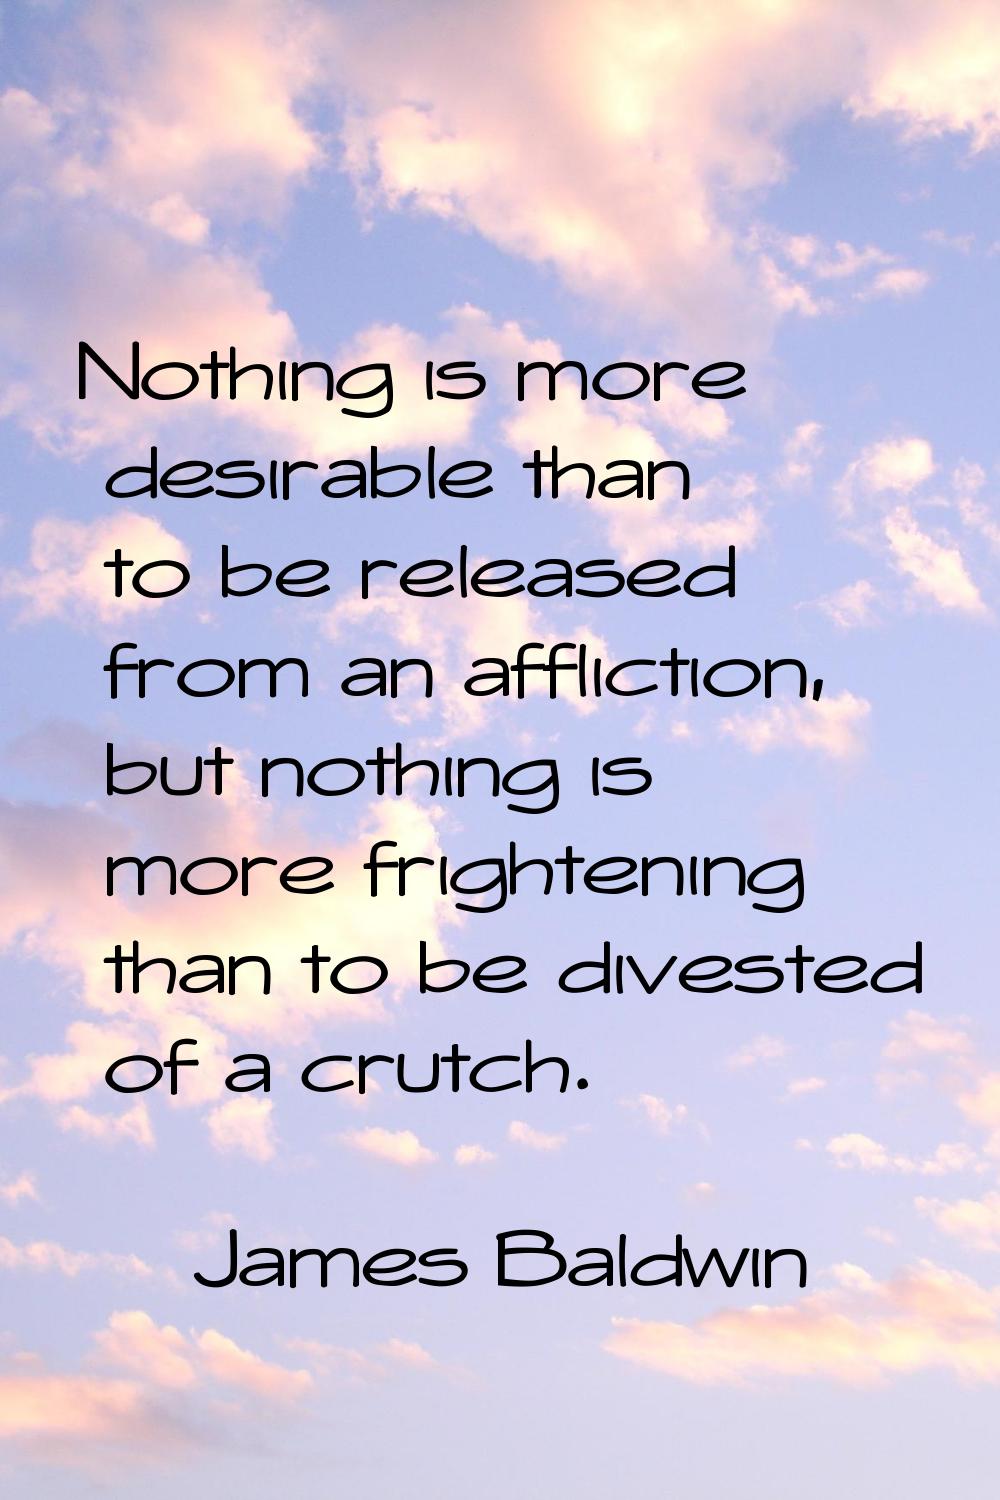 Nothing is more desirable than to be released from an affliction, but nothing is more frightening t